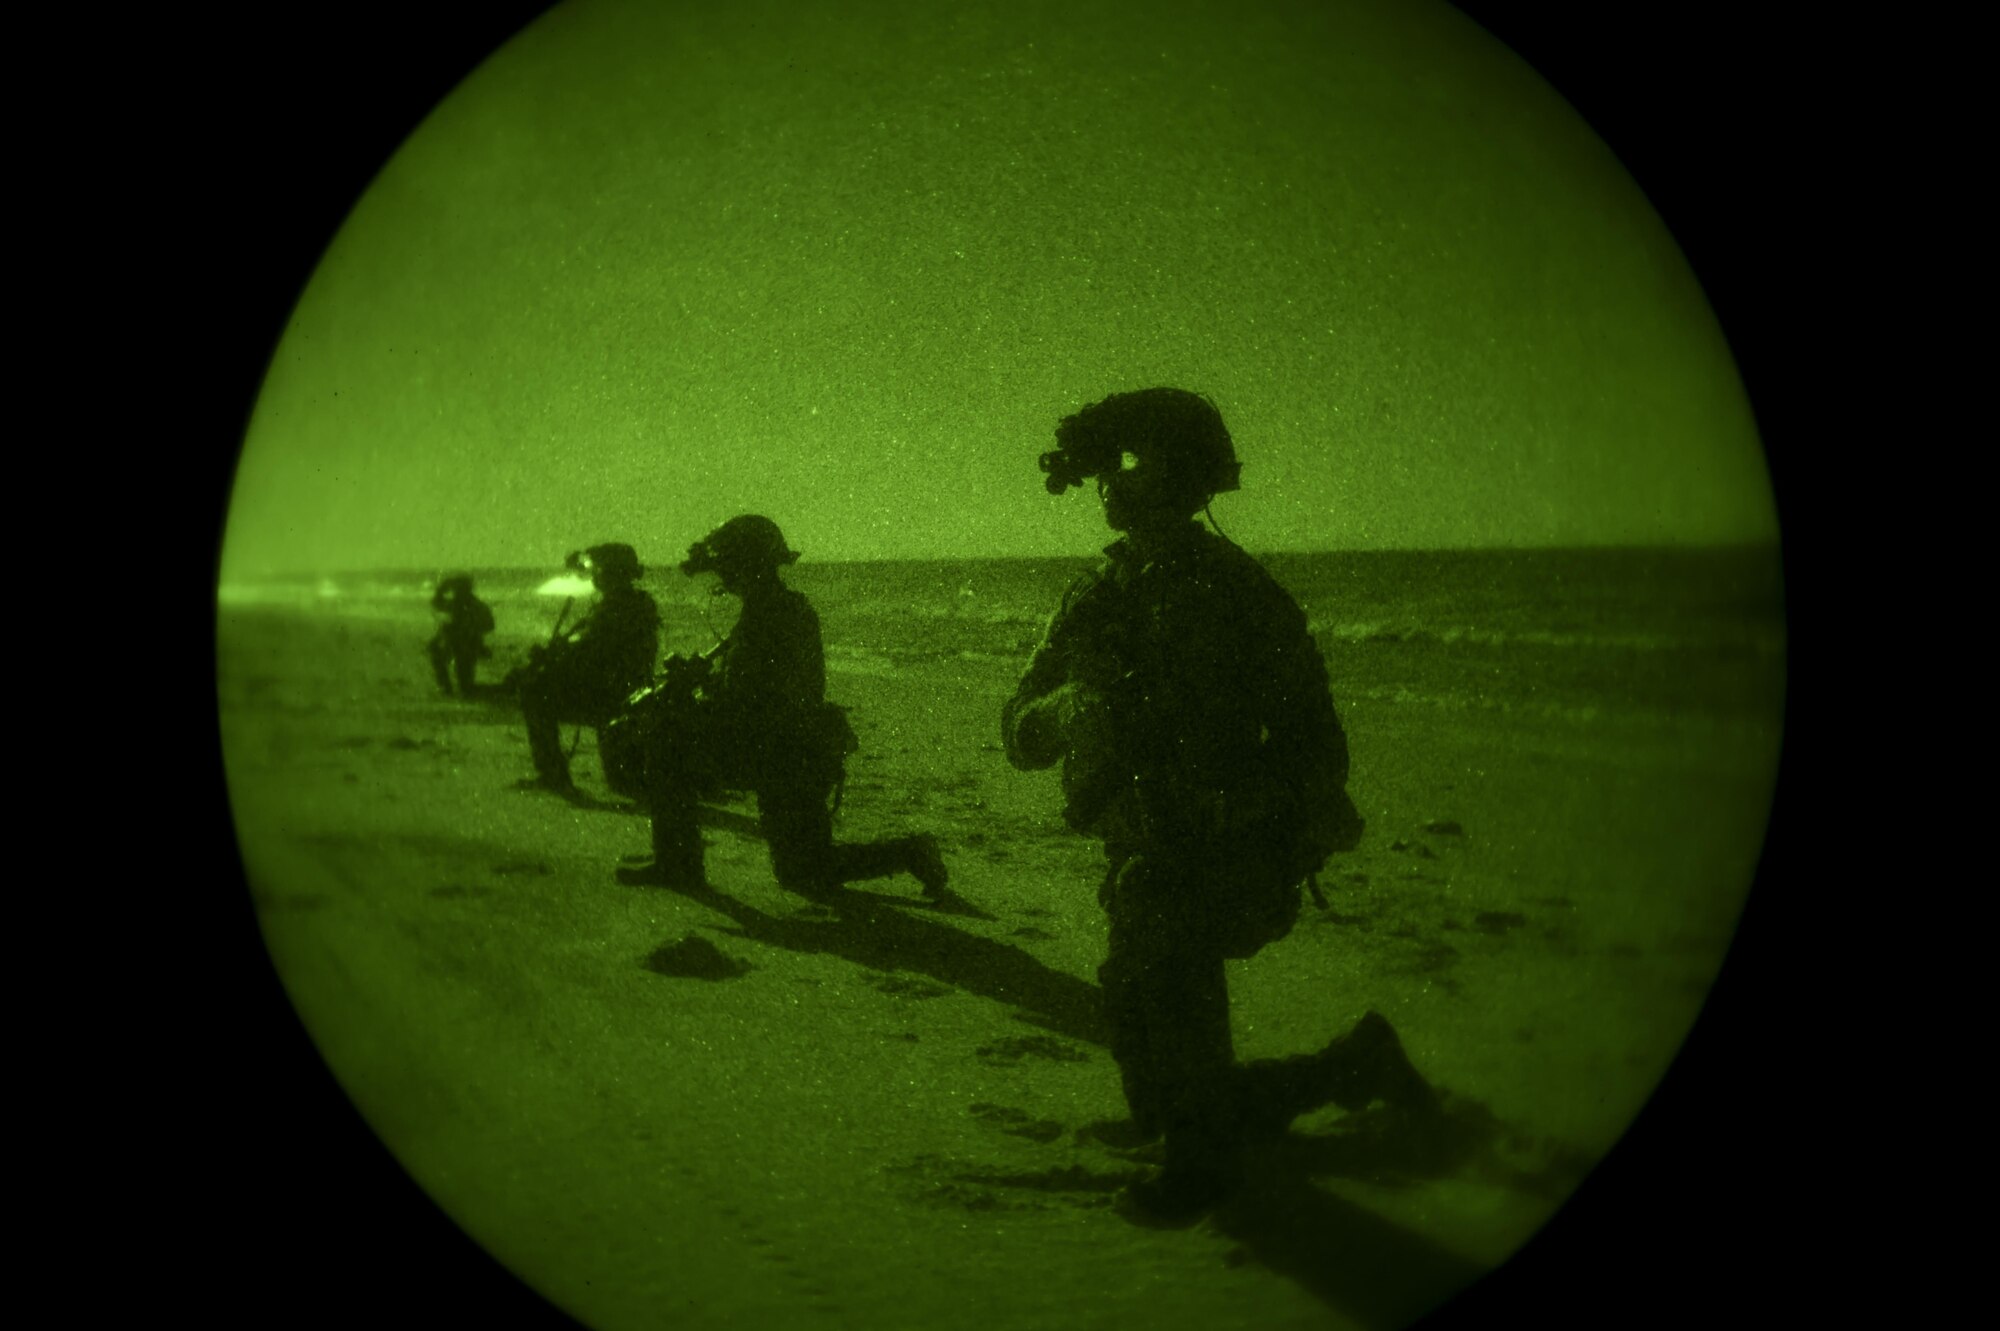 Marine Raiders with the Marine Corp Special Operations Command perform infiltration training at the Eglin Range, Fla., Oct. 30, 2015. The Raiders were dropped 12 miles off the shore and navigated through the darkness to infiltrate a pre-designated compound. (U.S. Air Force photo by Senior Airman Christopher Callaway) 